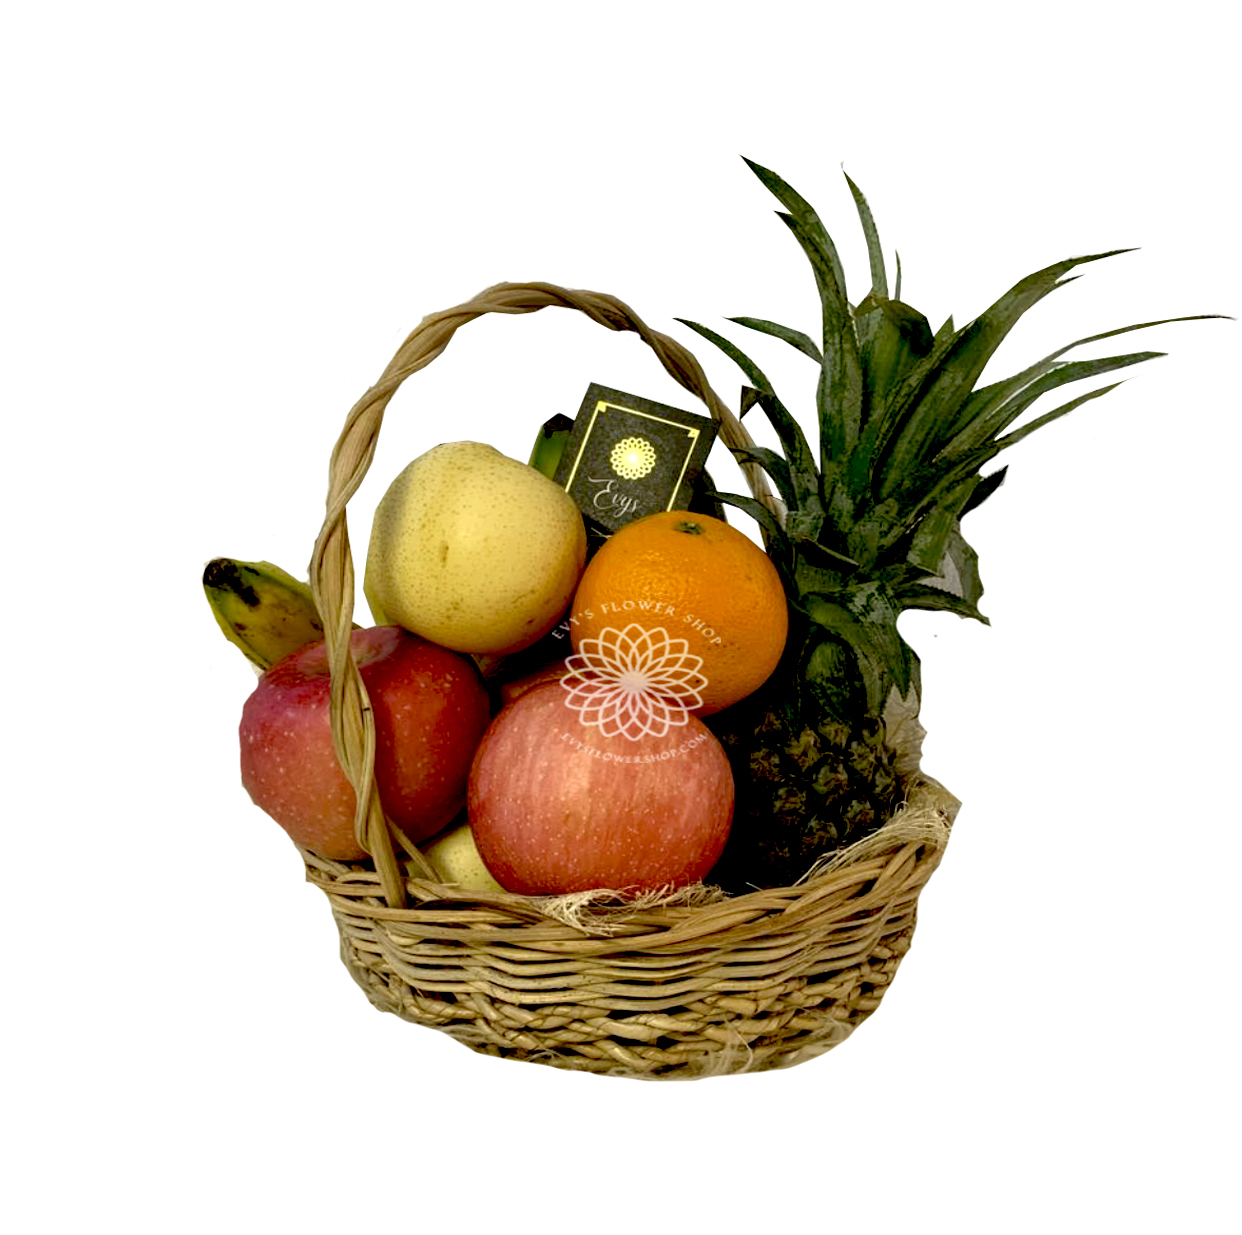 Fruit Basket Delivery Philippines I Call 83305174